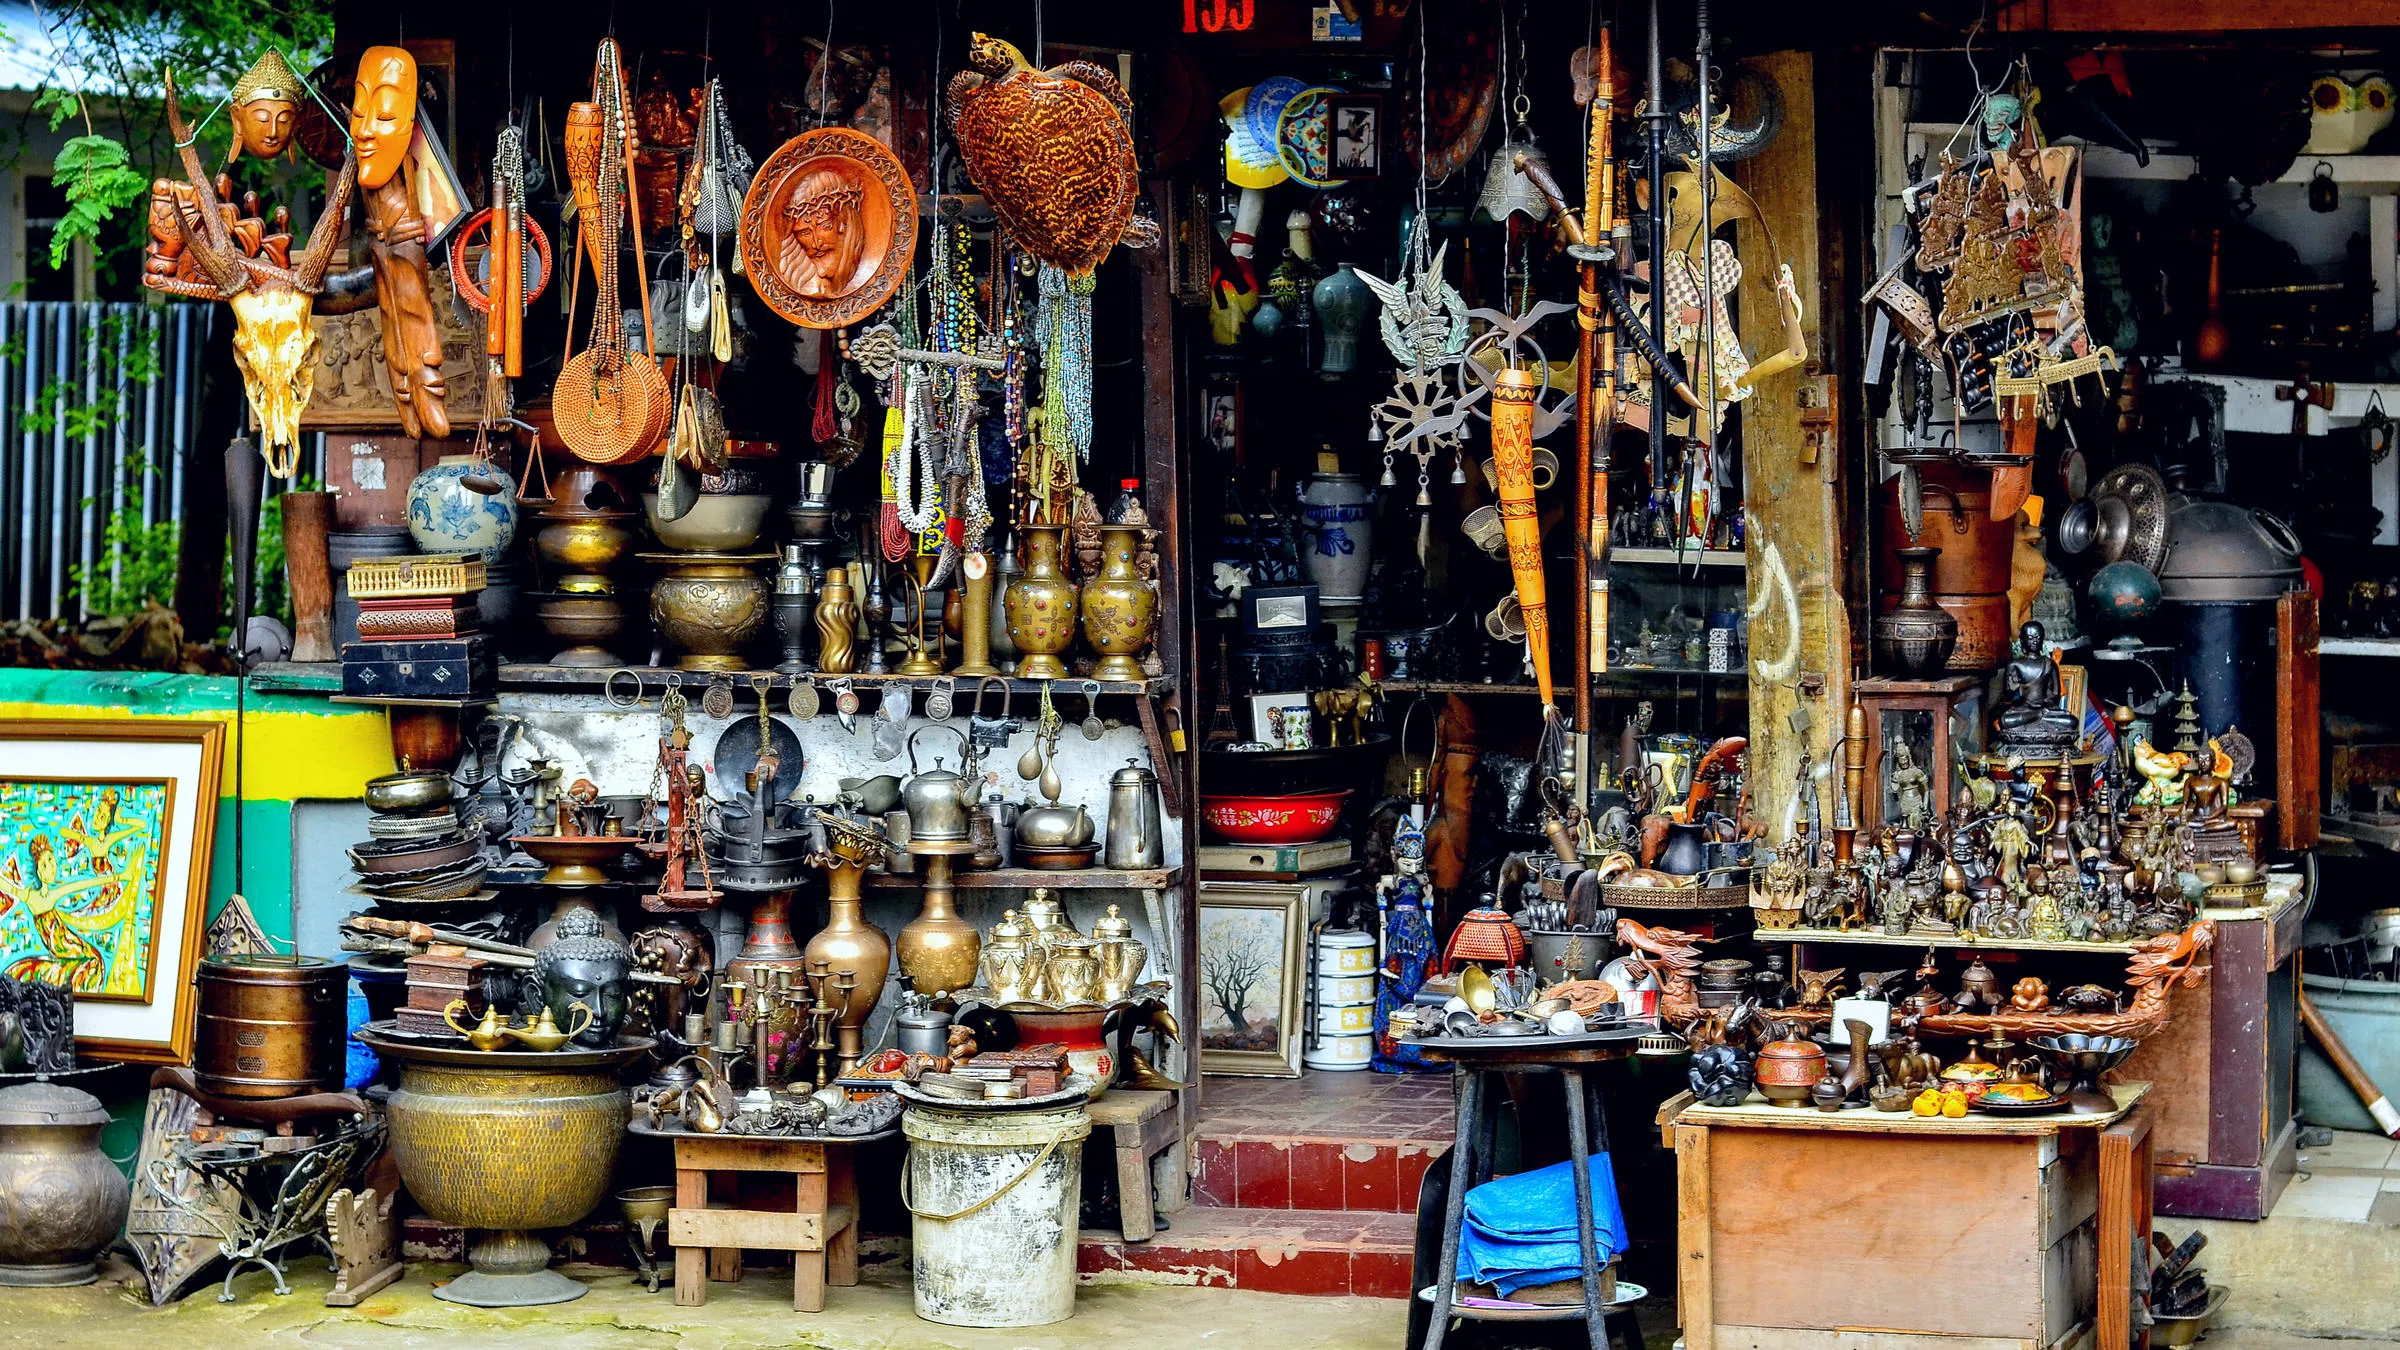 Jalan Surabaya Flea Market in Indonesia, central_asia | Souvenirs,Gifts,Other Crafts,Art - Country Helper